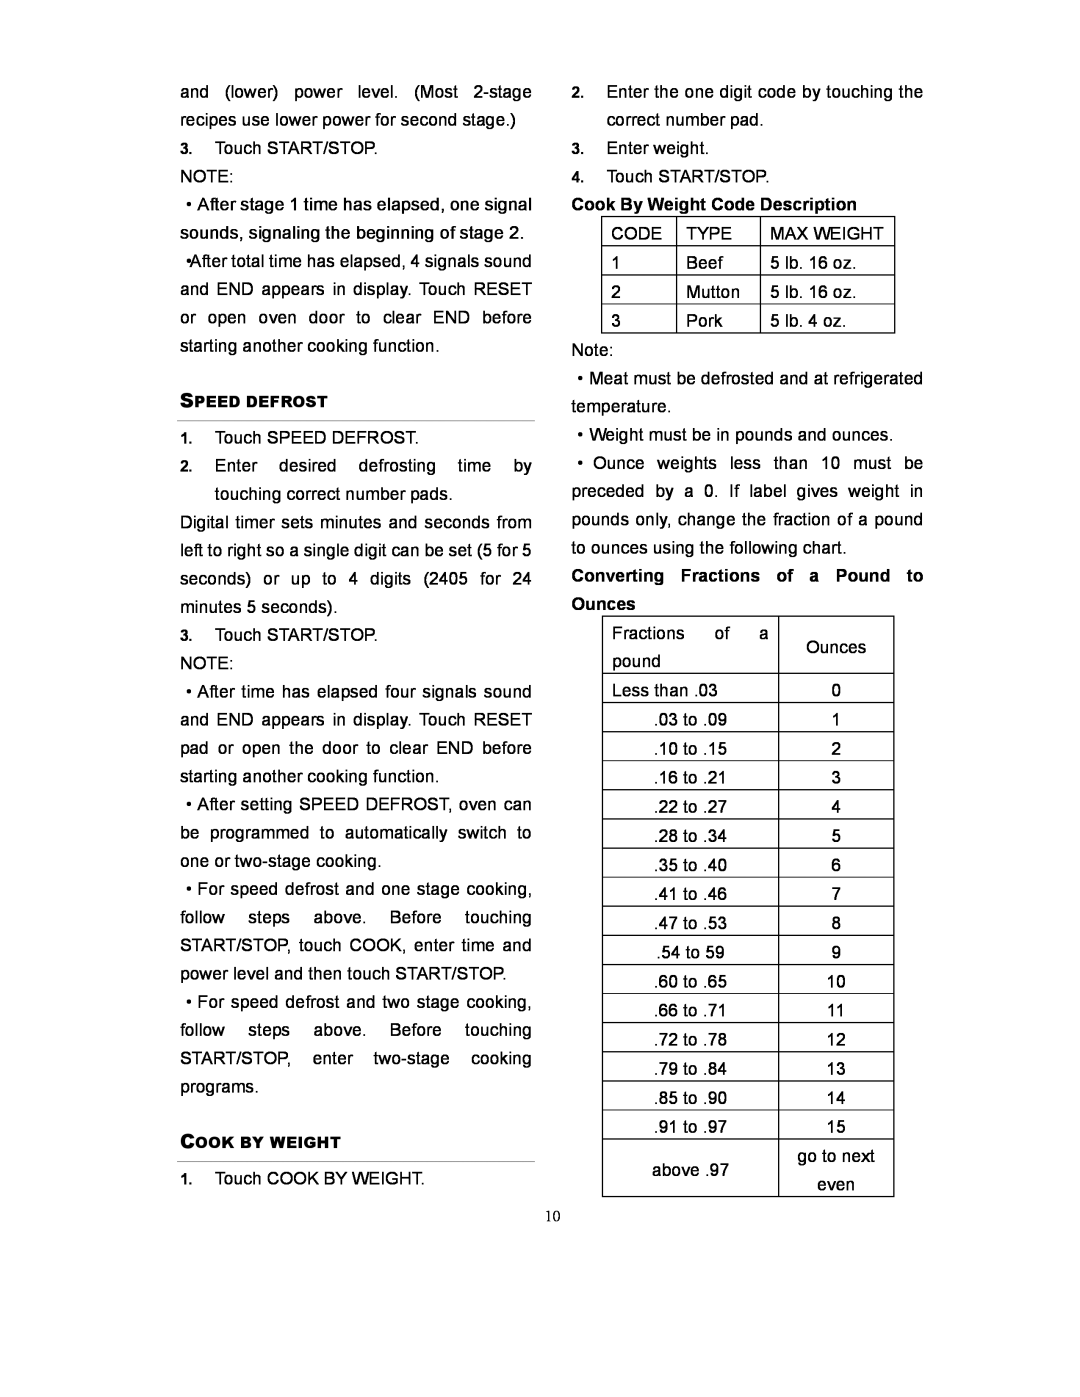 Kenmore 87032 owner manual Cook By Weight Code Description, Converting Fractions of a Pound to Ounces 